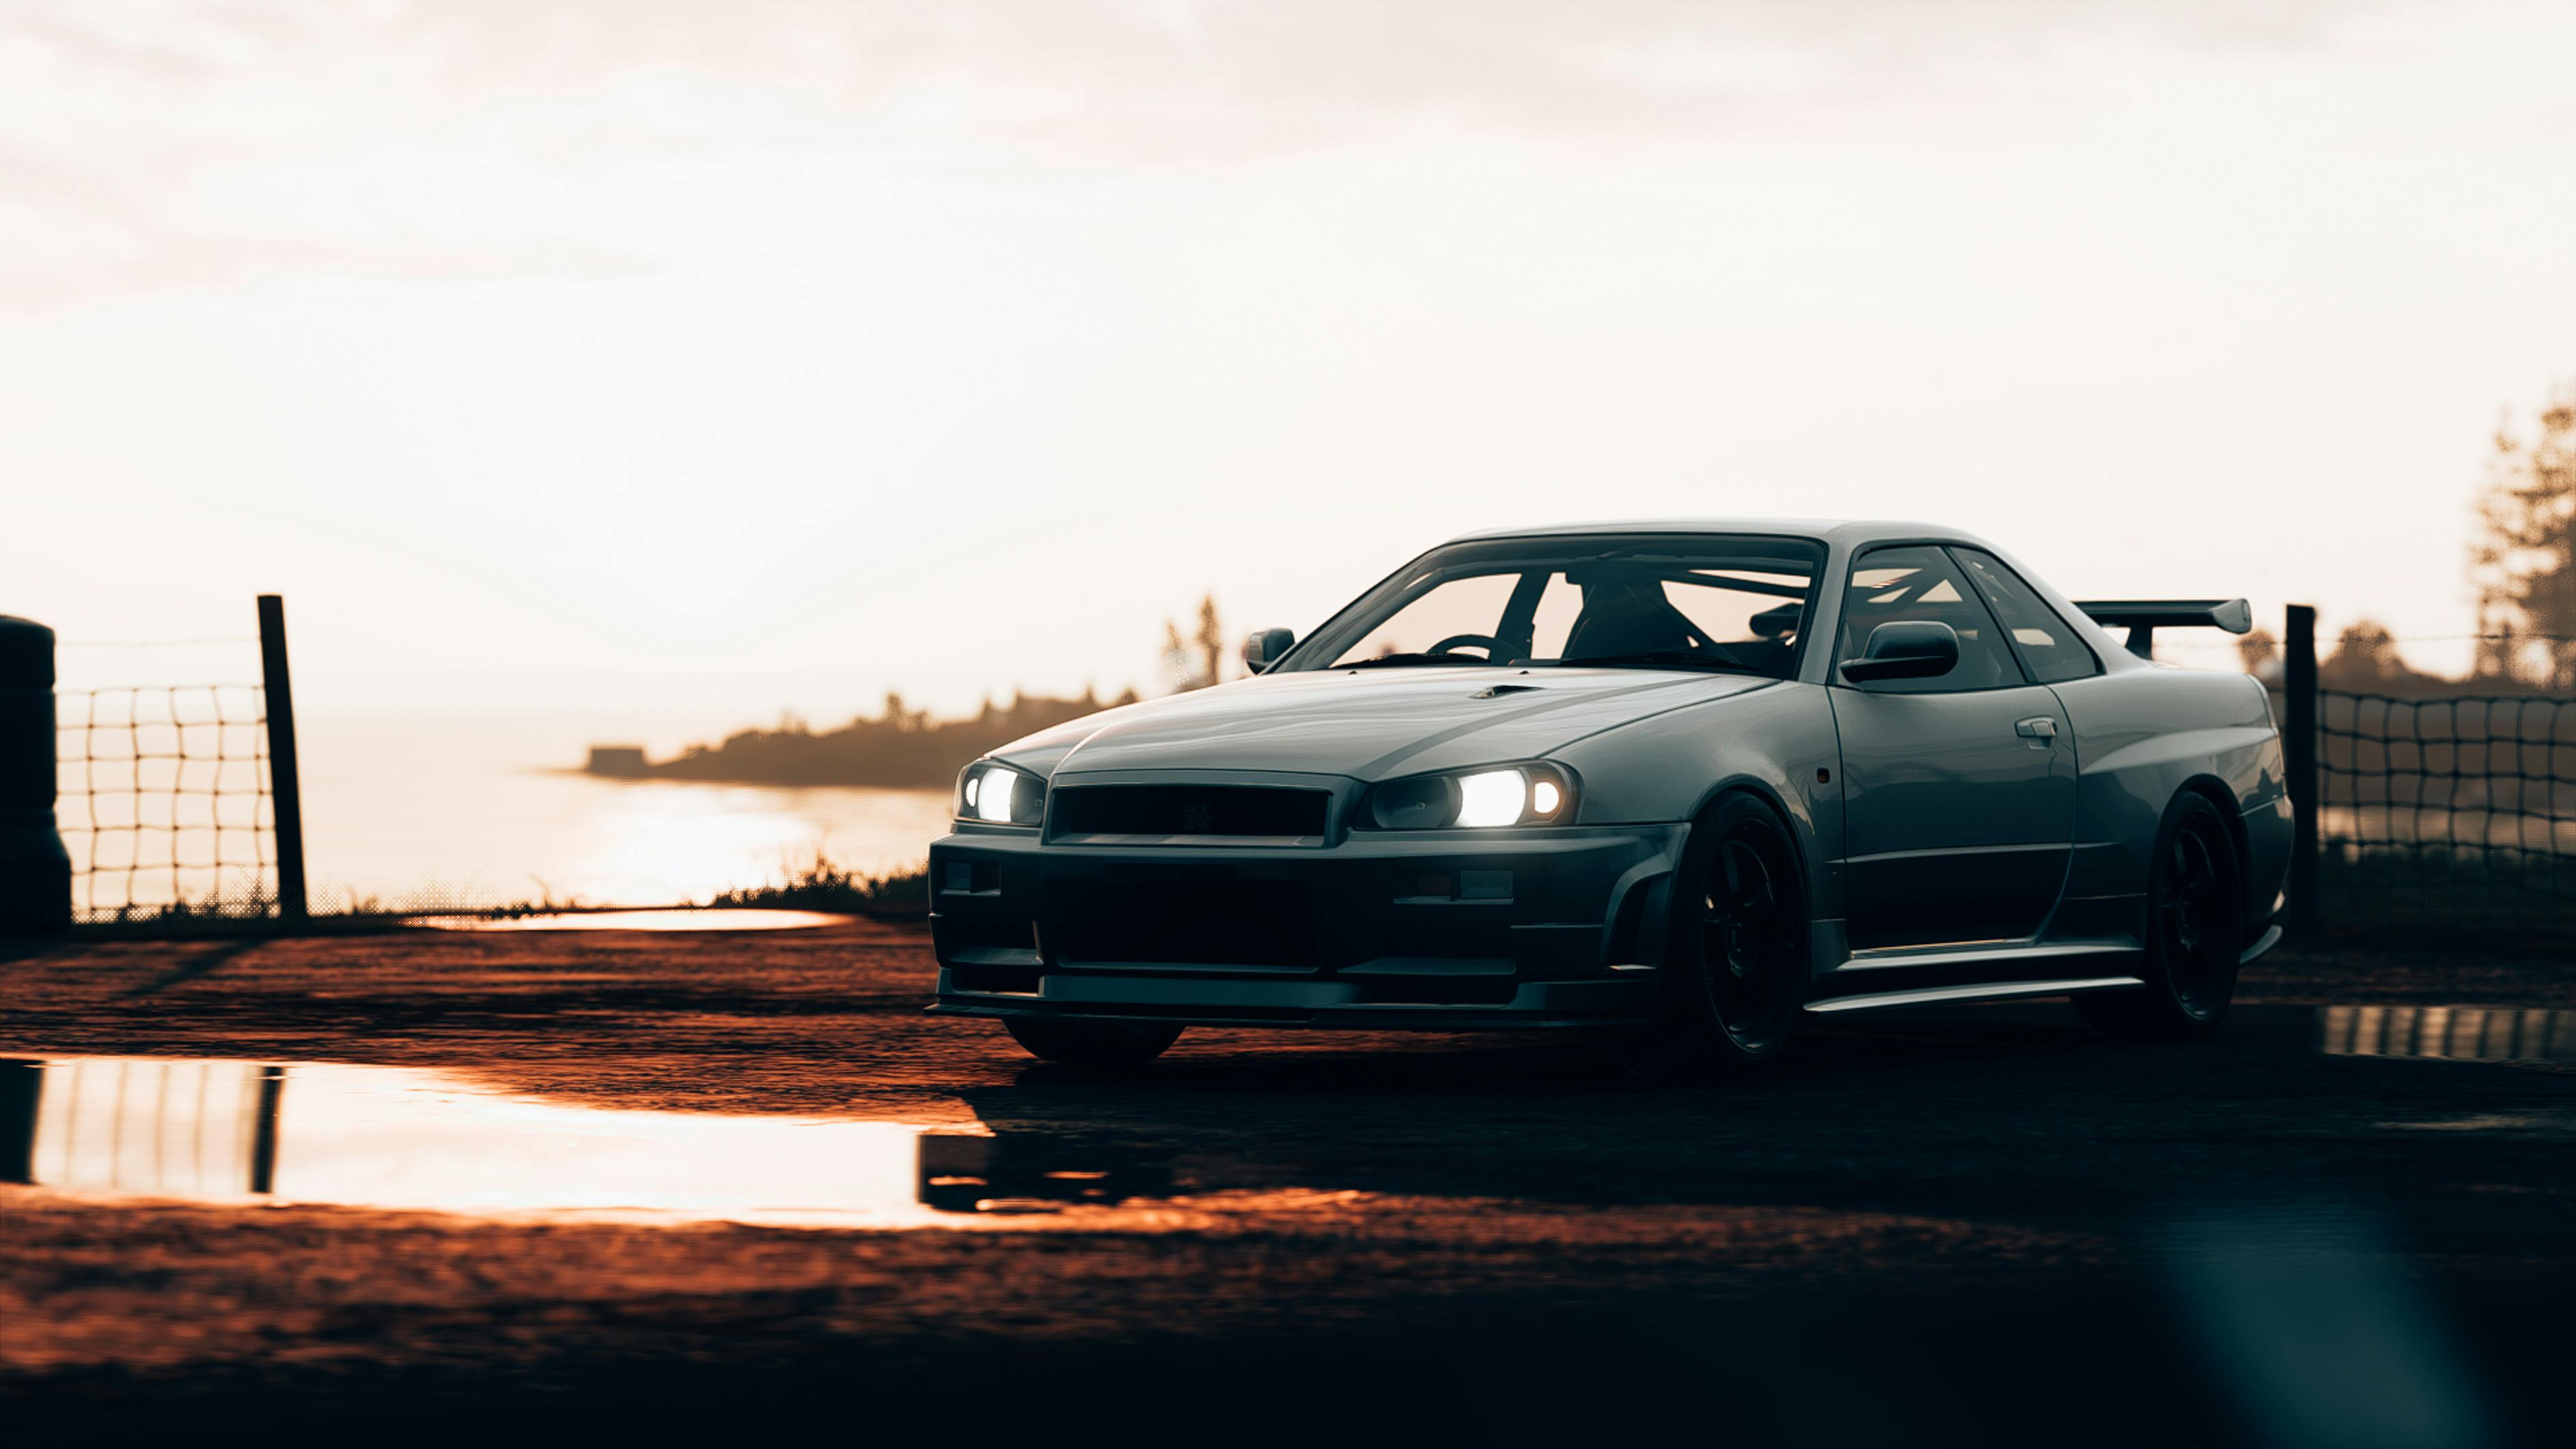 Jdm Photos, Download The BEST Free Jdm Stock Photos & HD Images